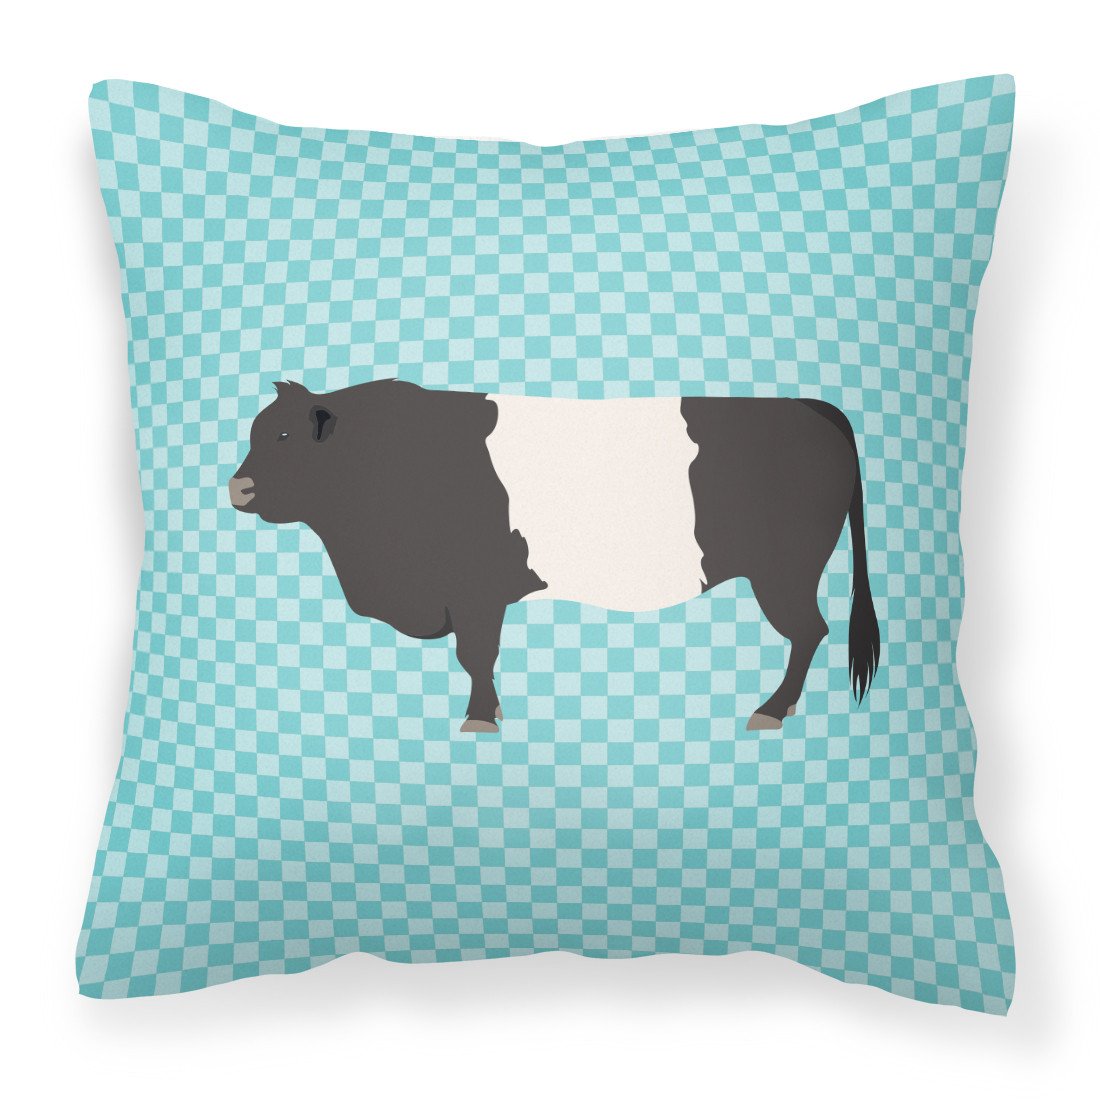 Belted Galloway Cow Blue Check Fabric Decorative Pillow BB8005PW1818 by Caroline's Treasures